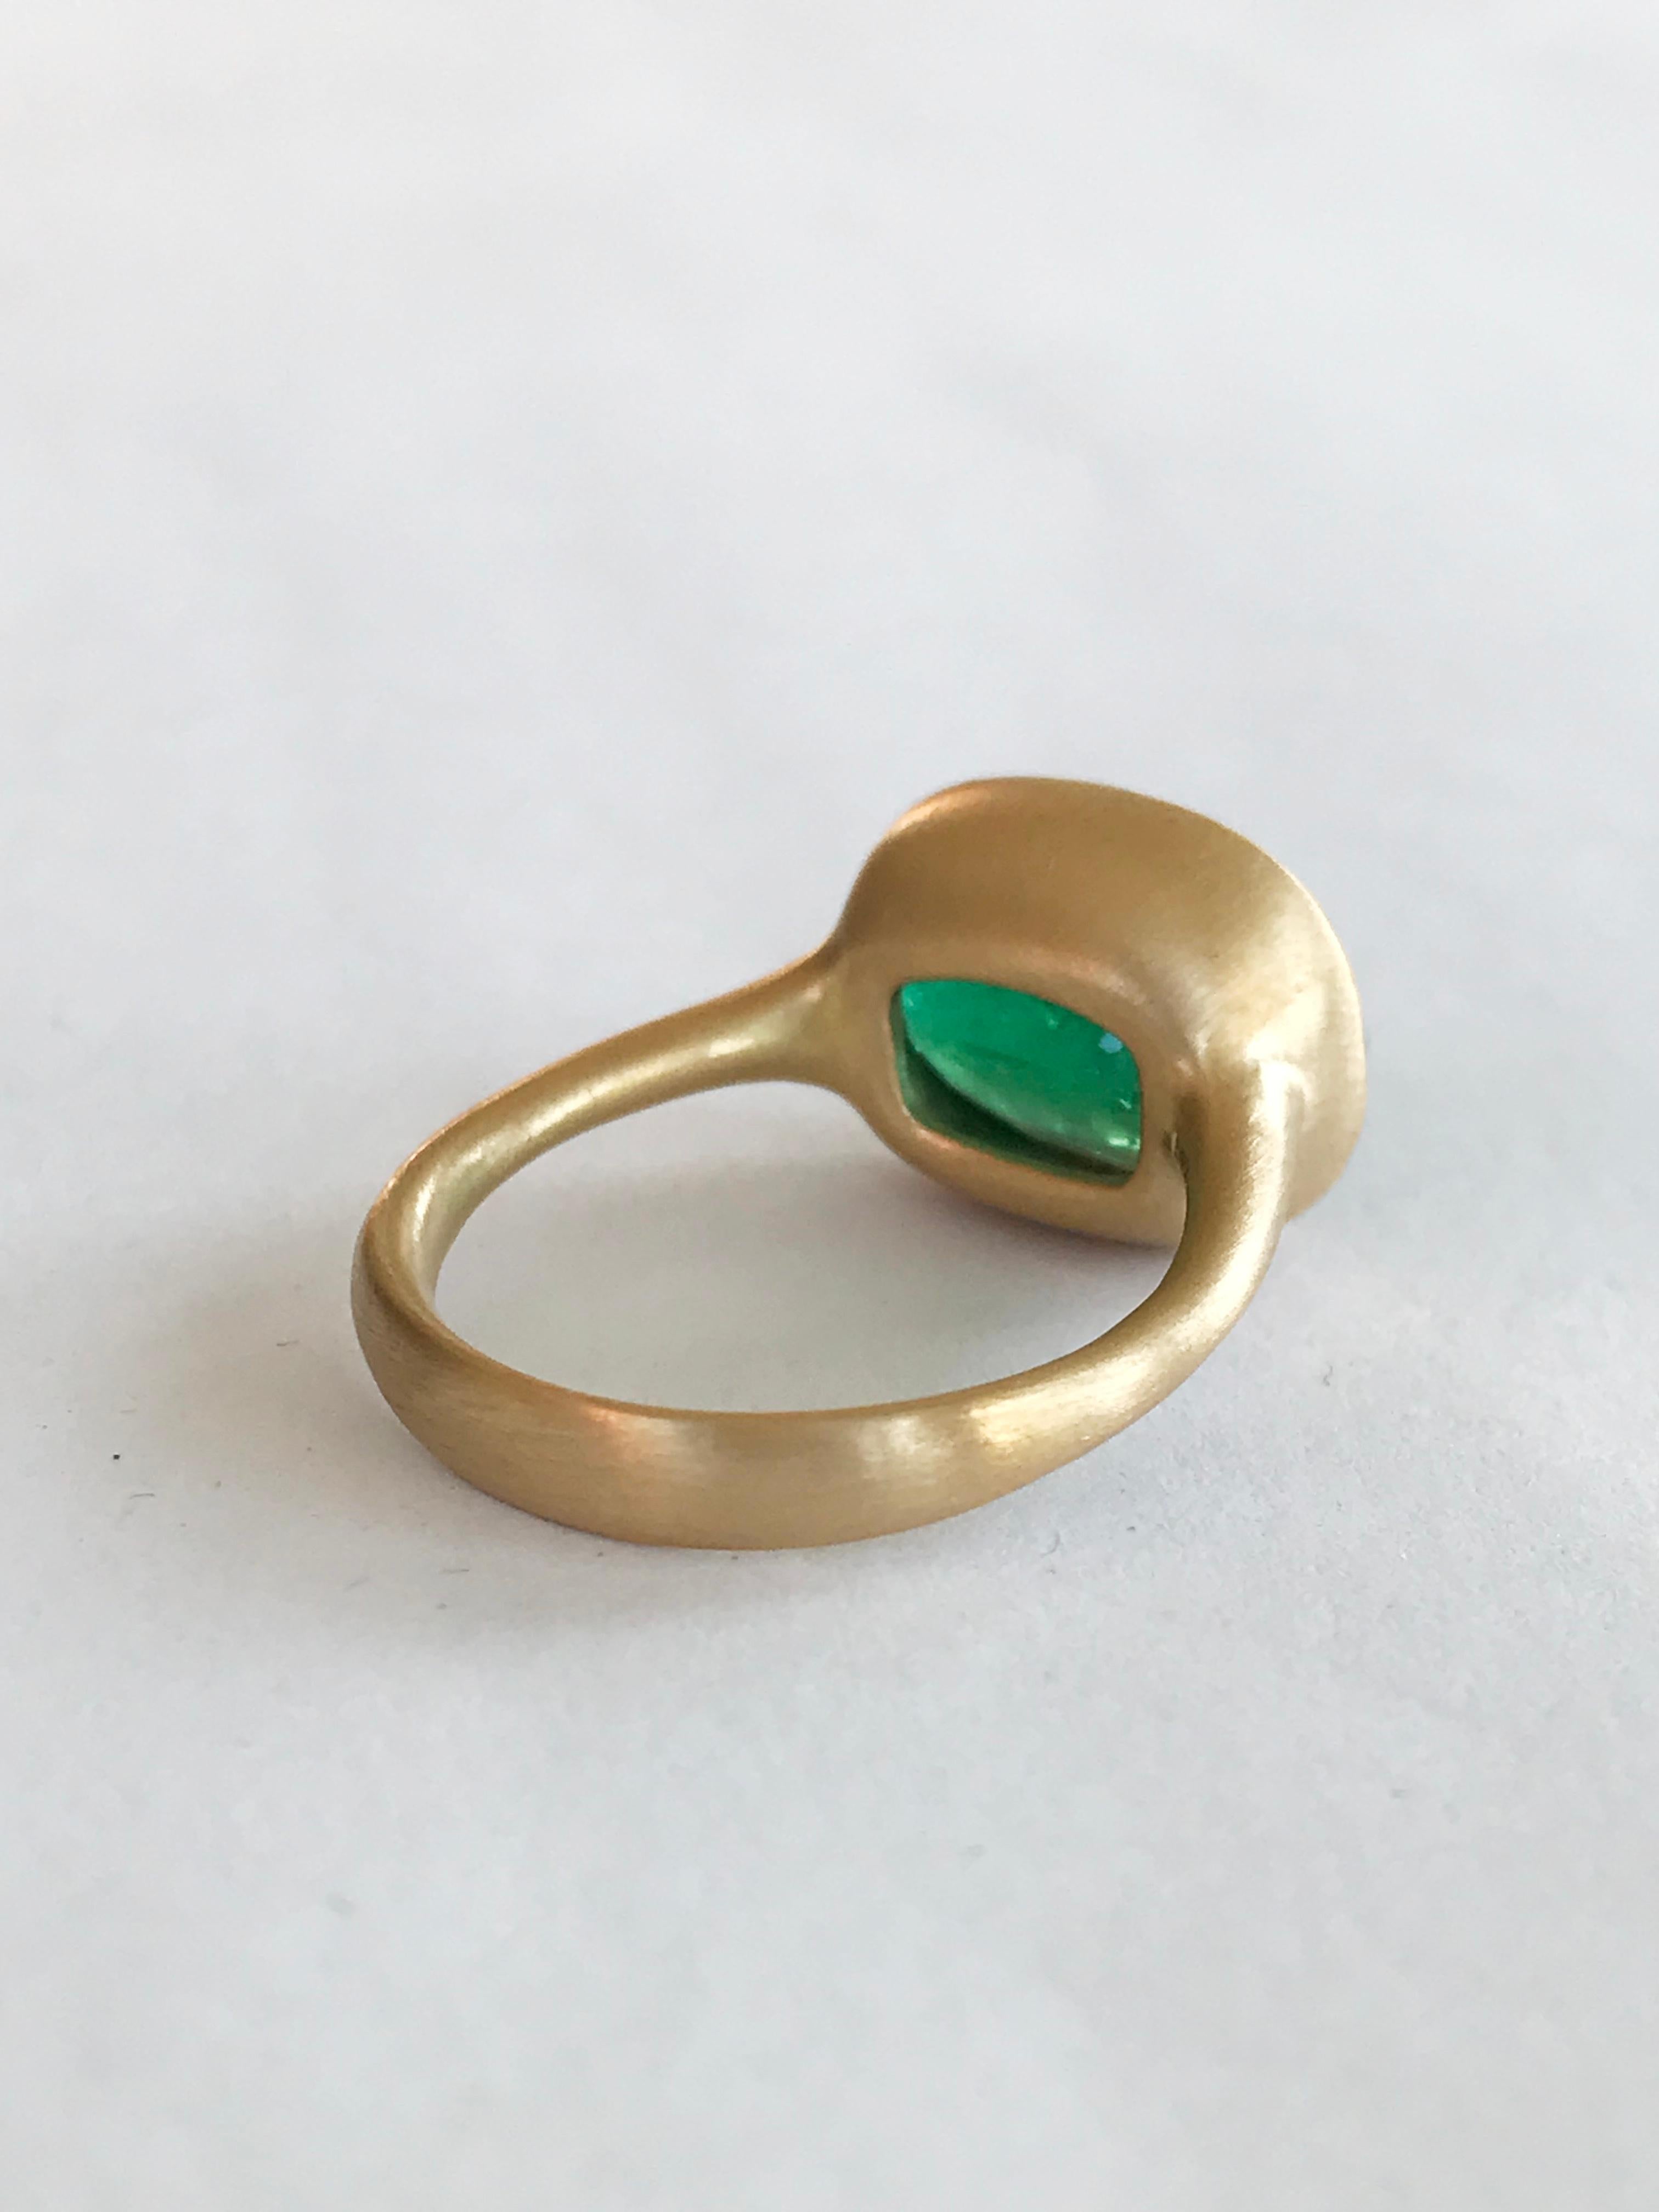 Dalben 4.9 Carat Emerald Yellow Gold Ring For Sale 8